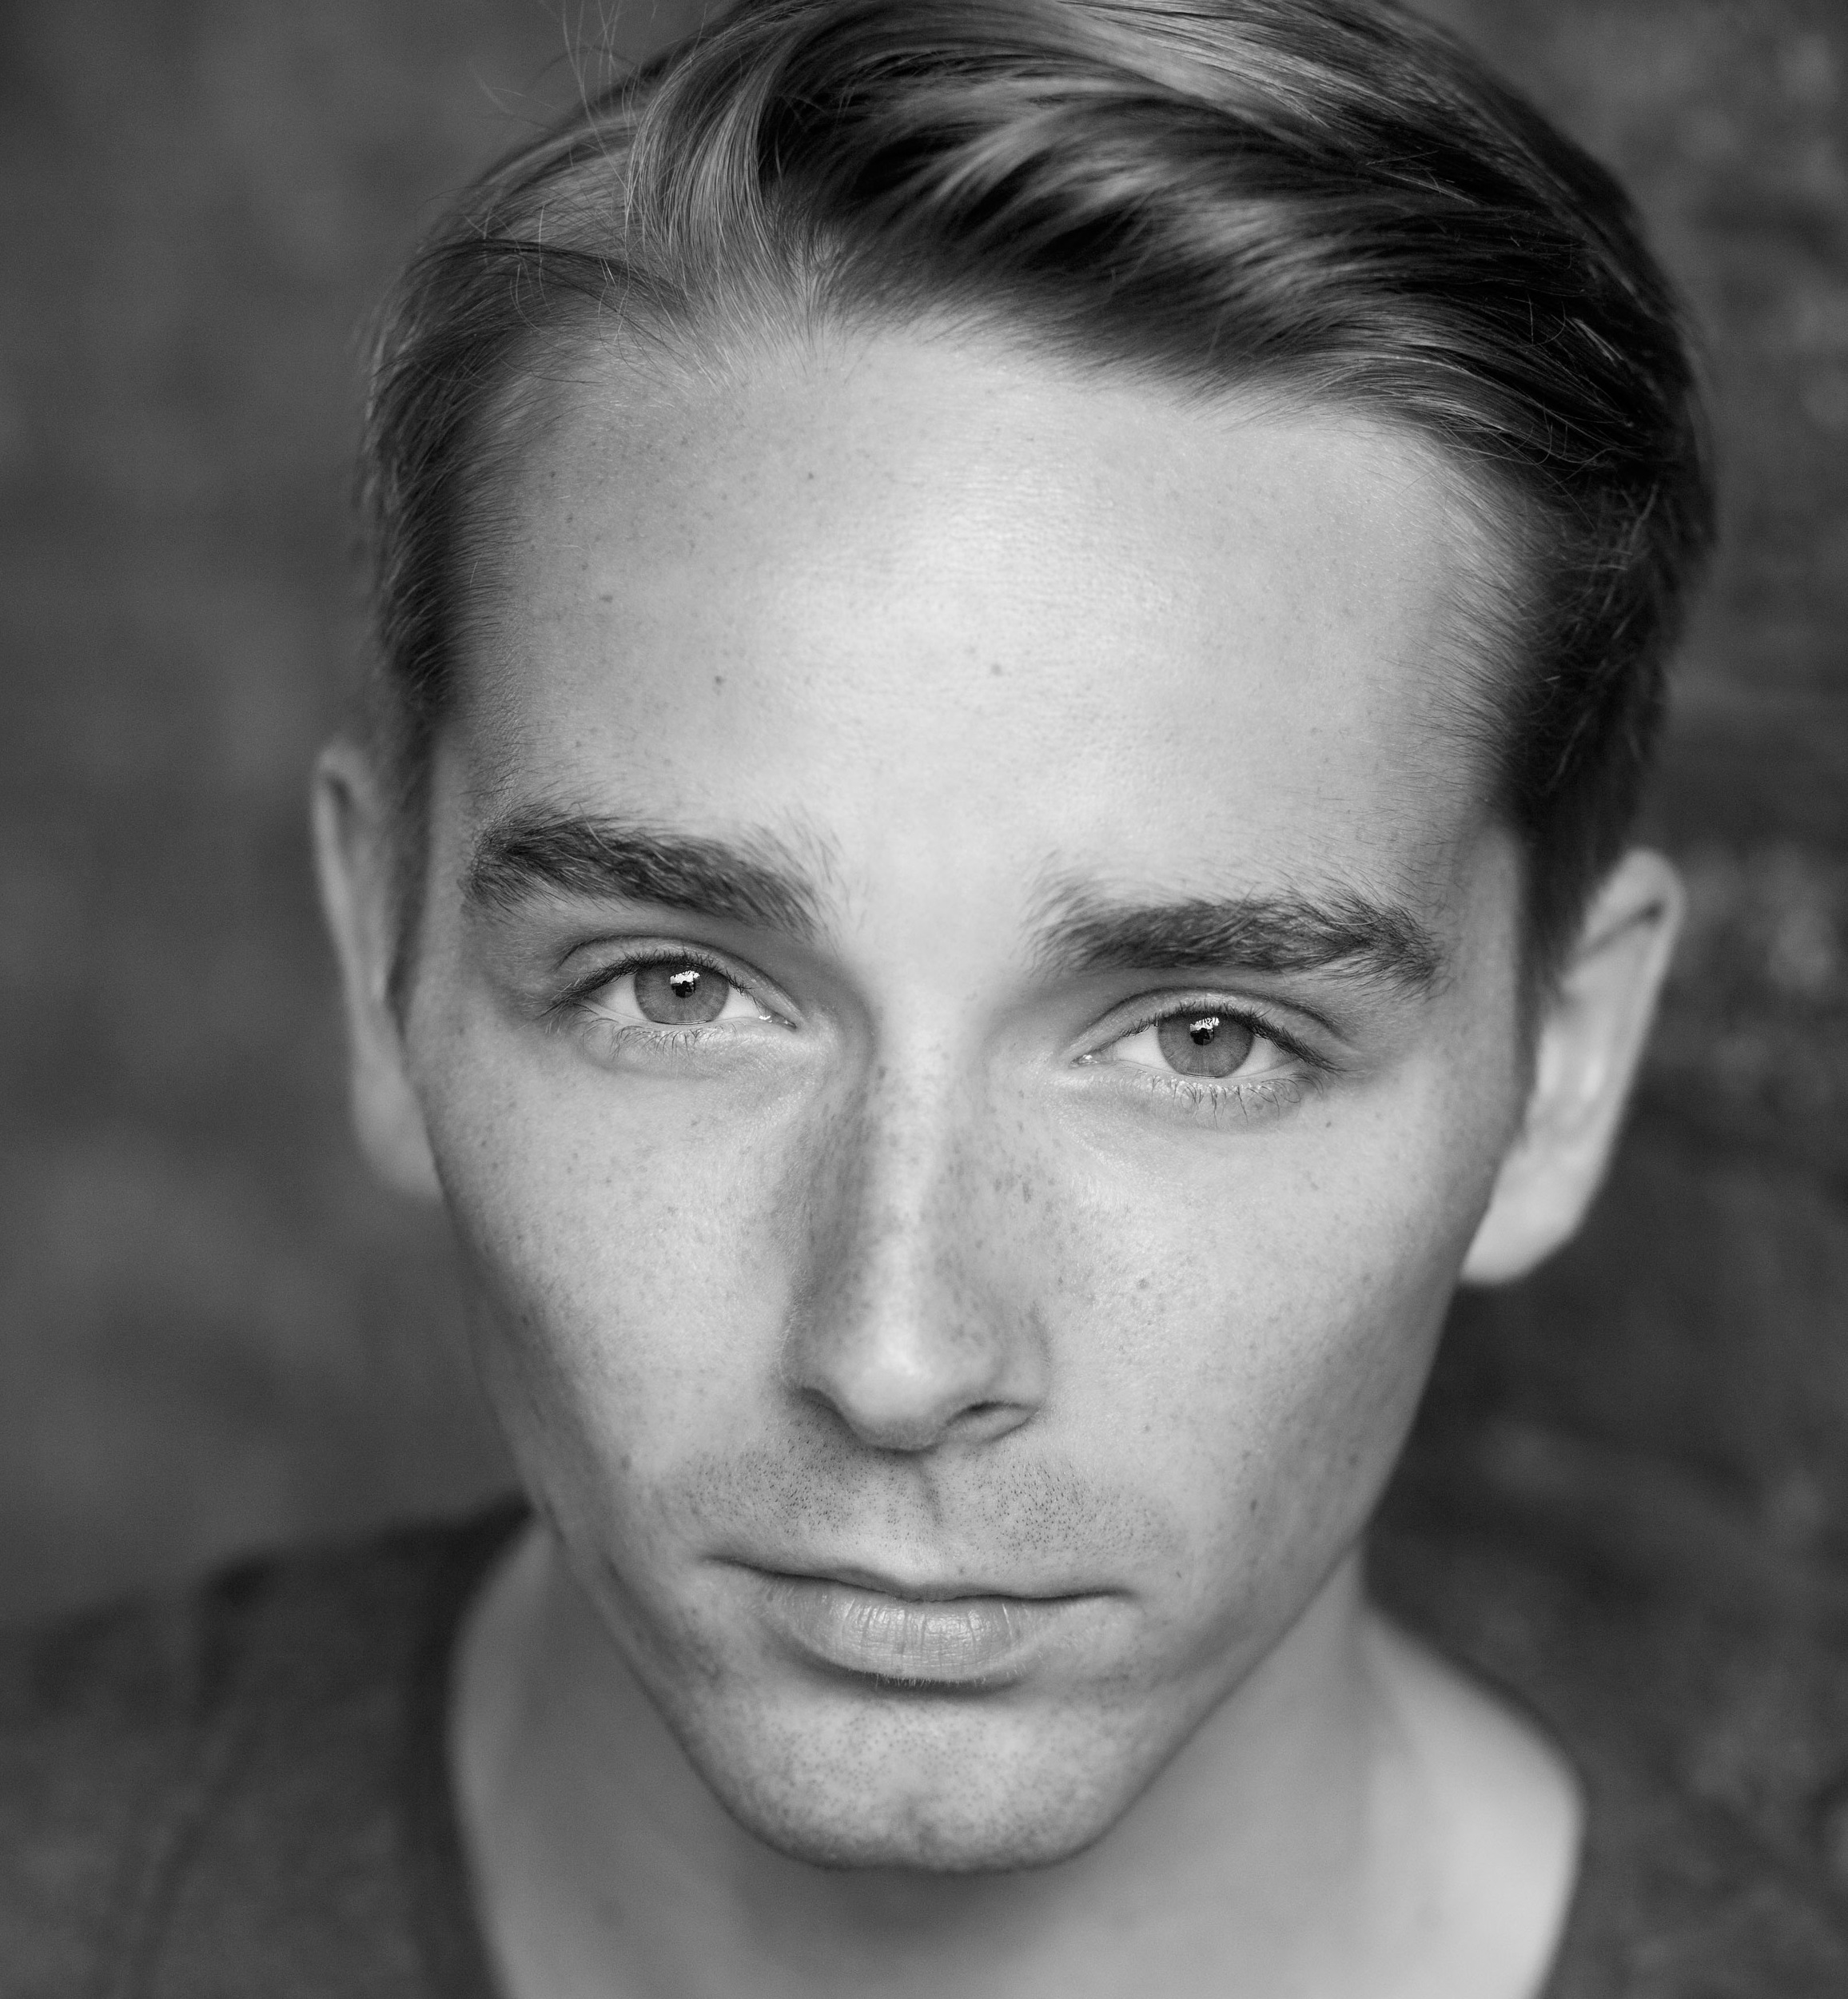 Hull-born dancer Liam Mower will appear in Swan Lake in the city.